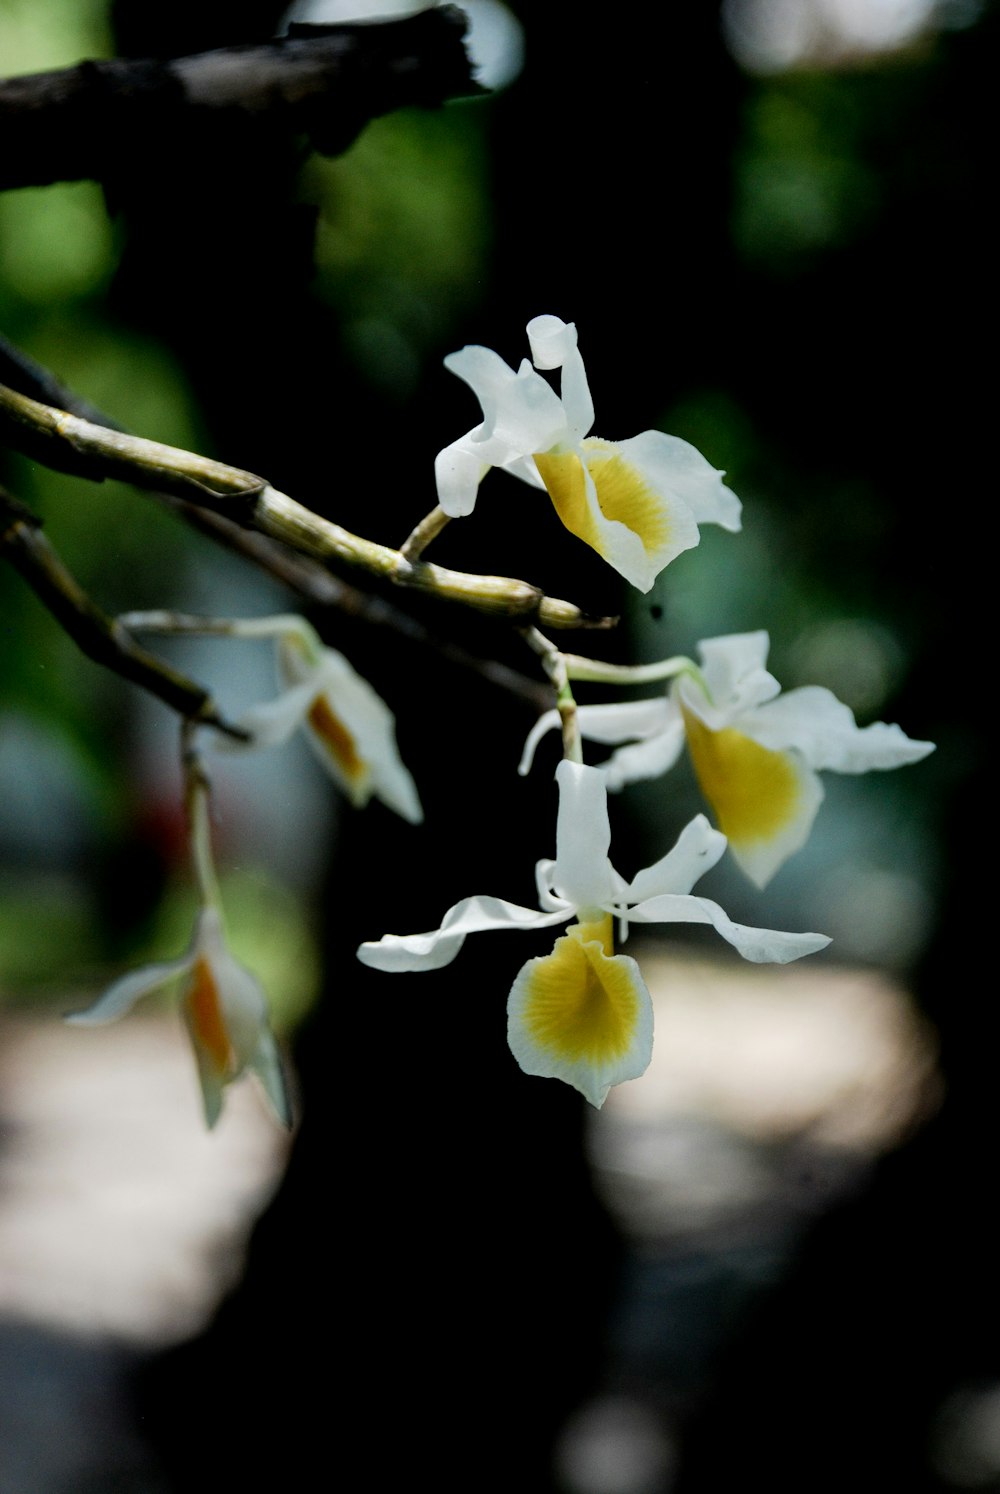 a branch with white and yellow flowers on it